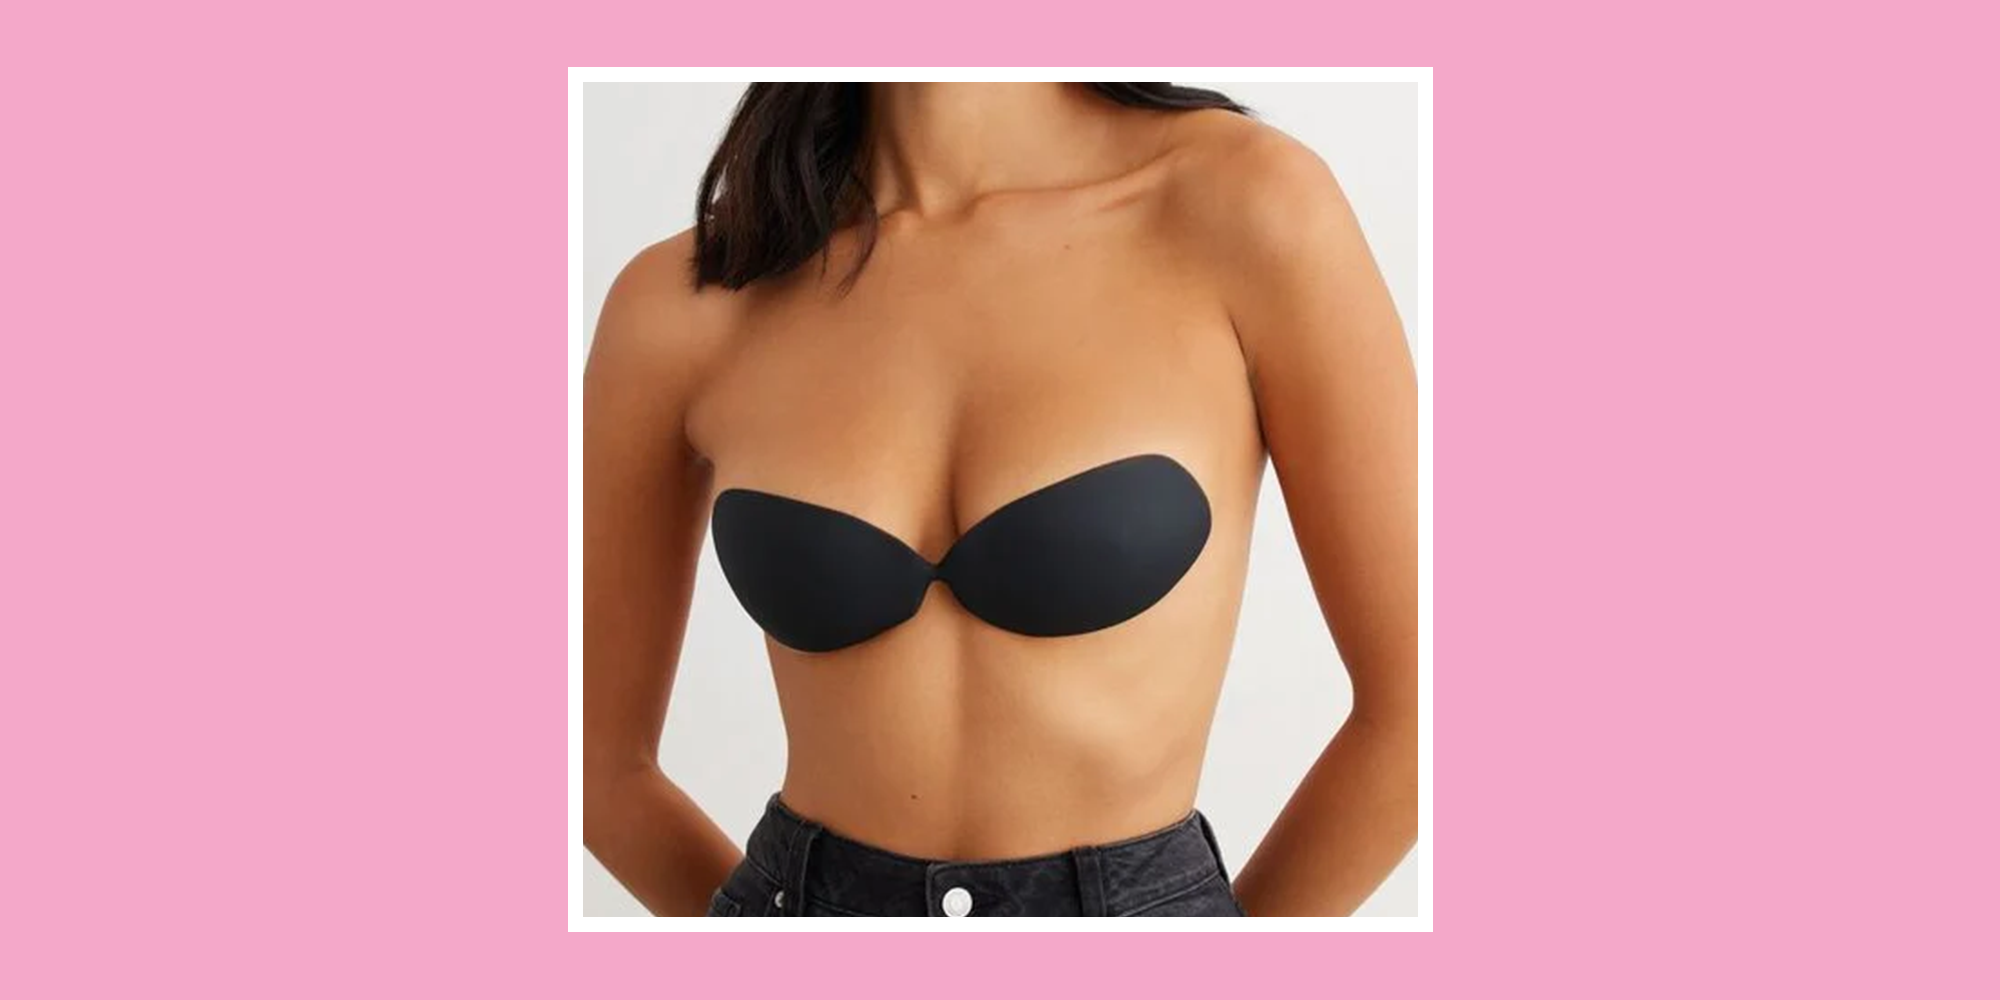 21 Low-Back Bras Perfect To Wear With Backless Dresses